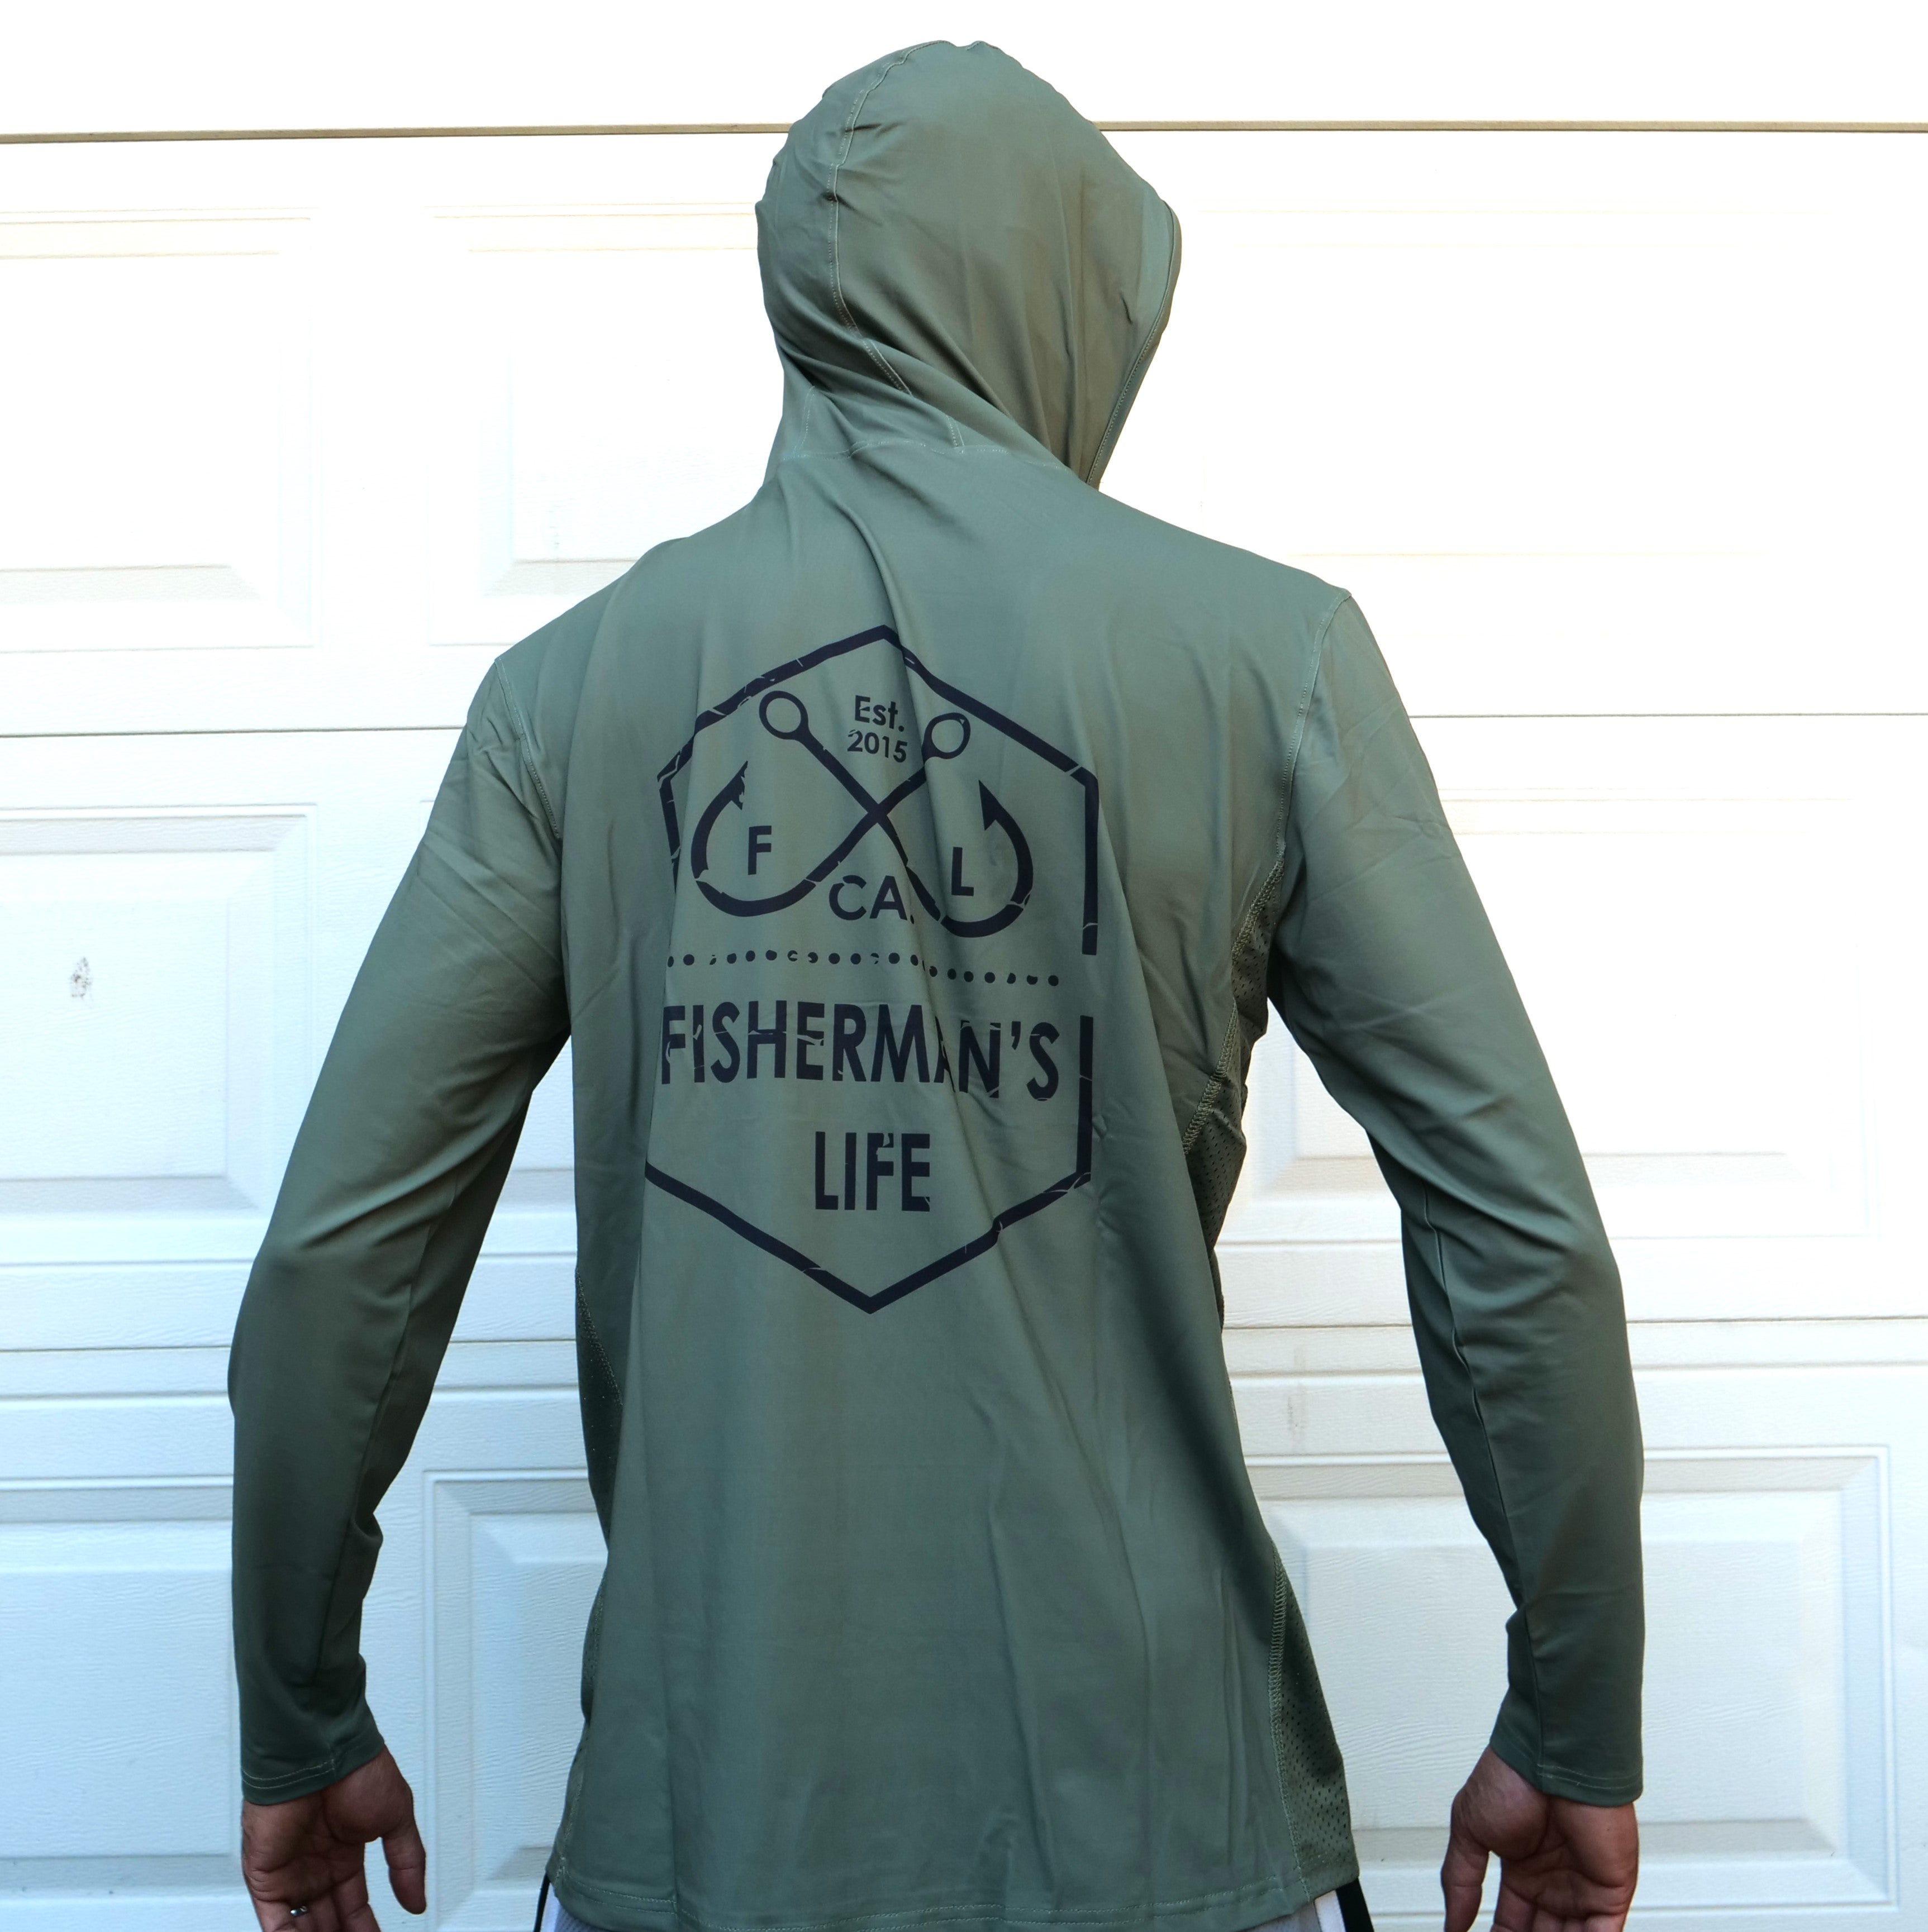 UPF 50+ Long Sleeve Shirt with Hood and Facemask